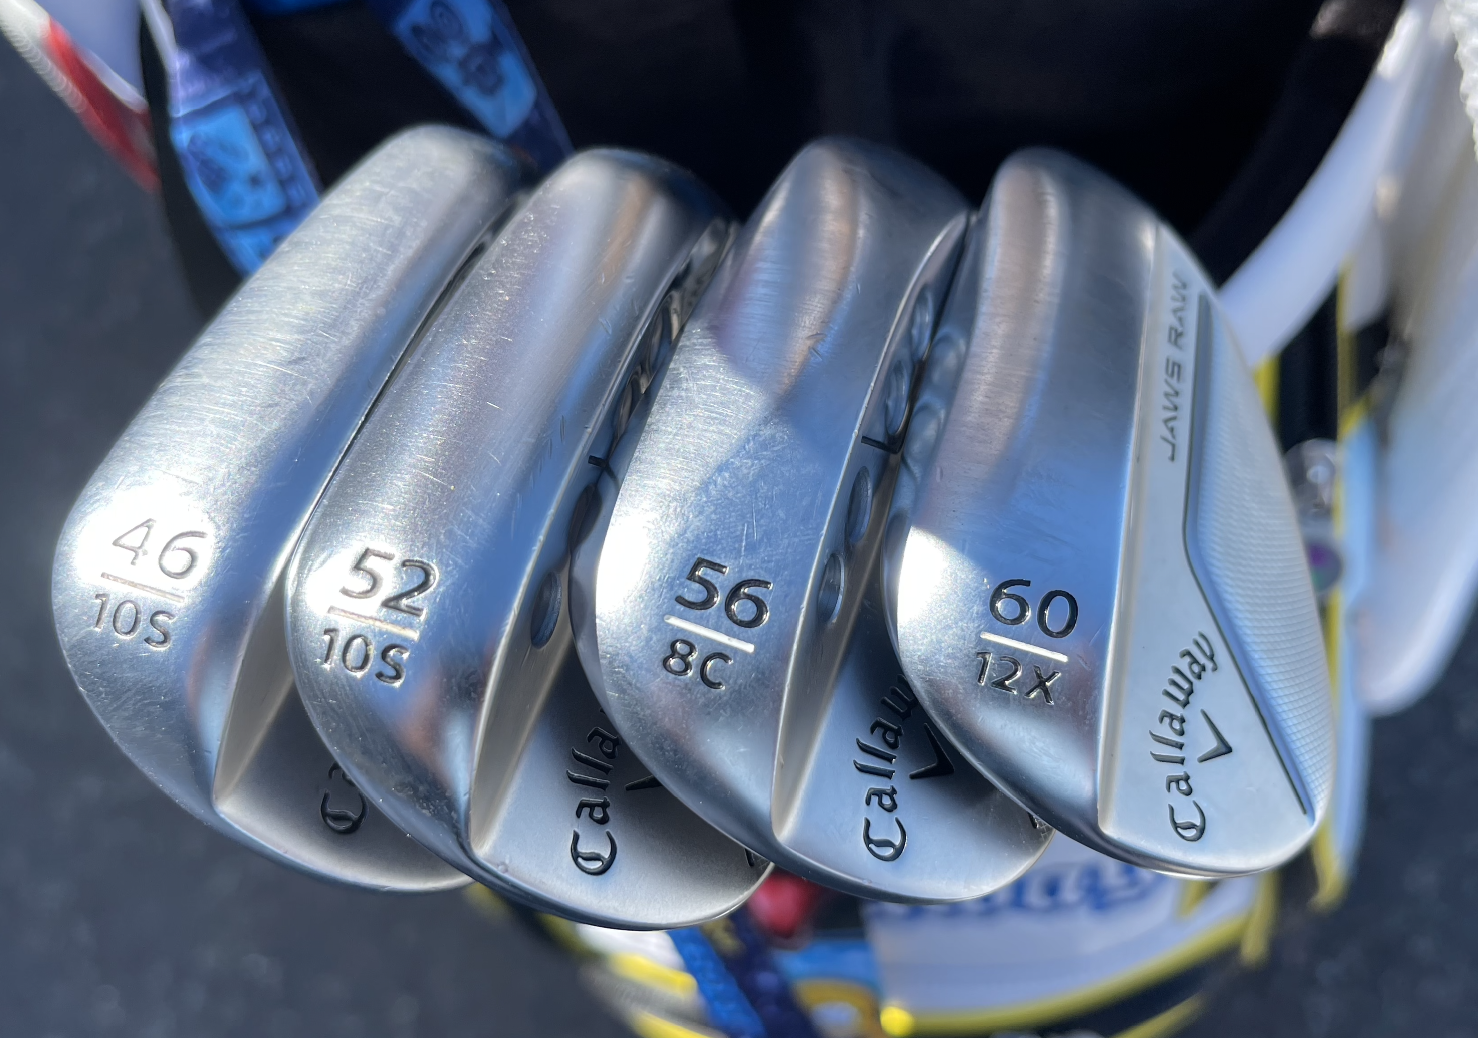 Fall Fitting Series: How many wedges do I need? - World of Wunder